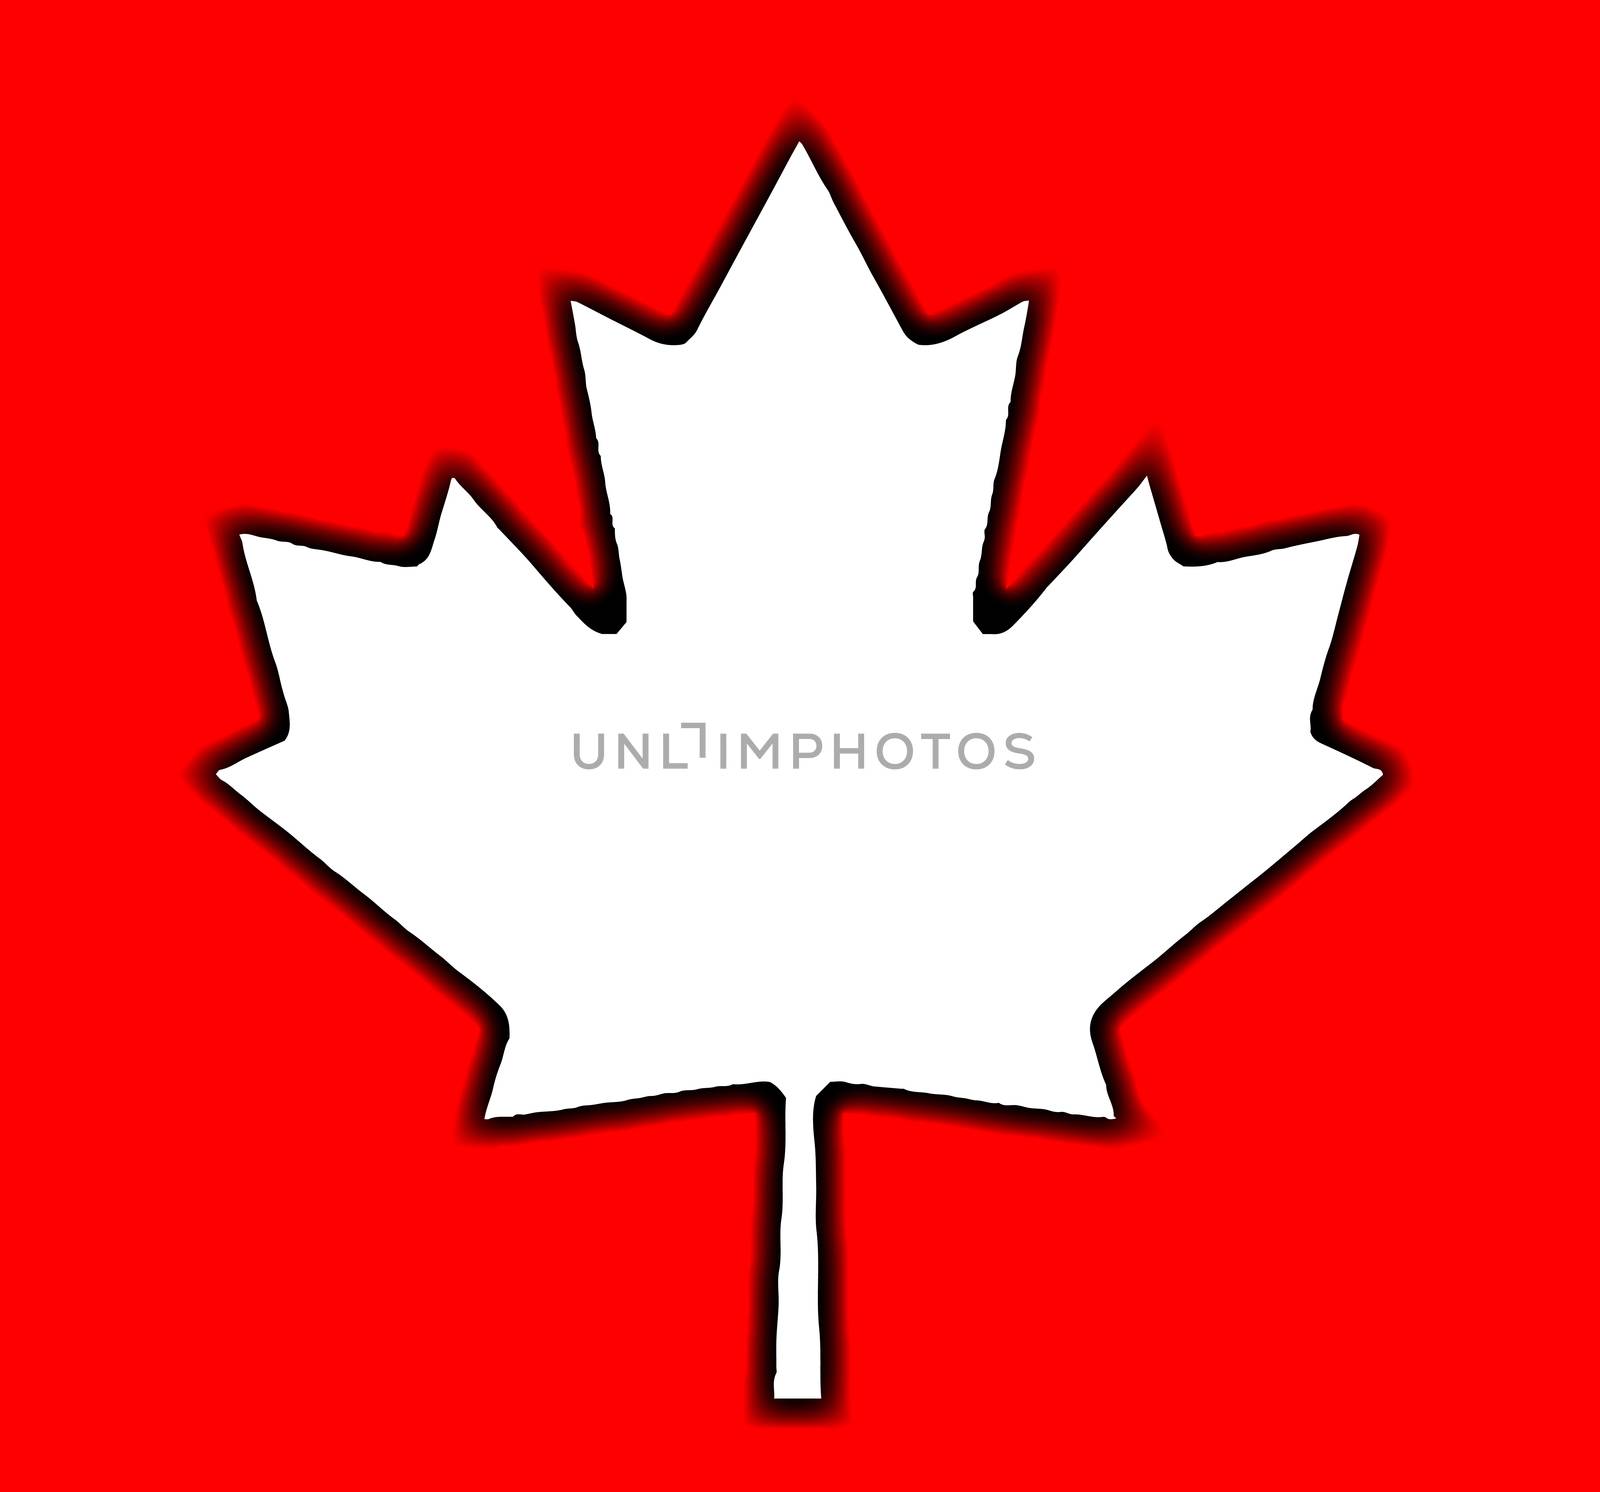 The Canadian maple leaf flag design over a red background